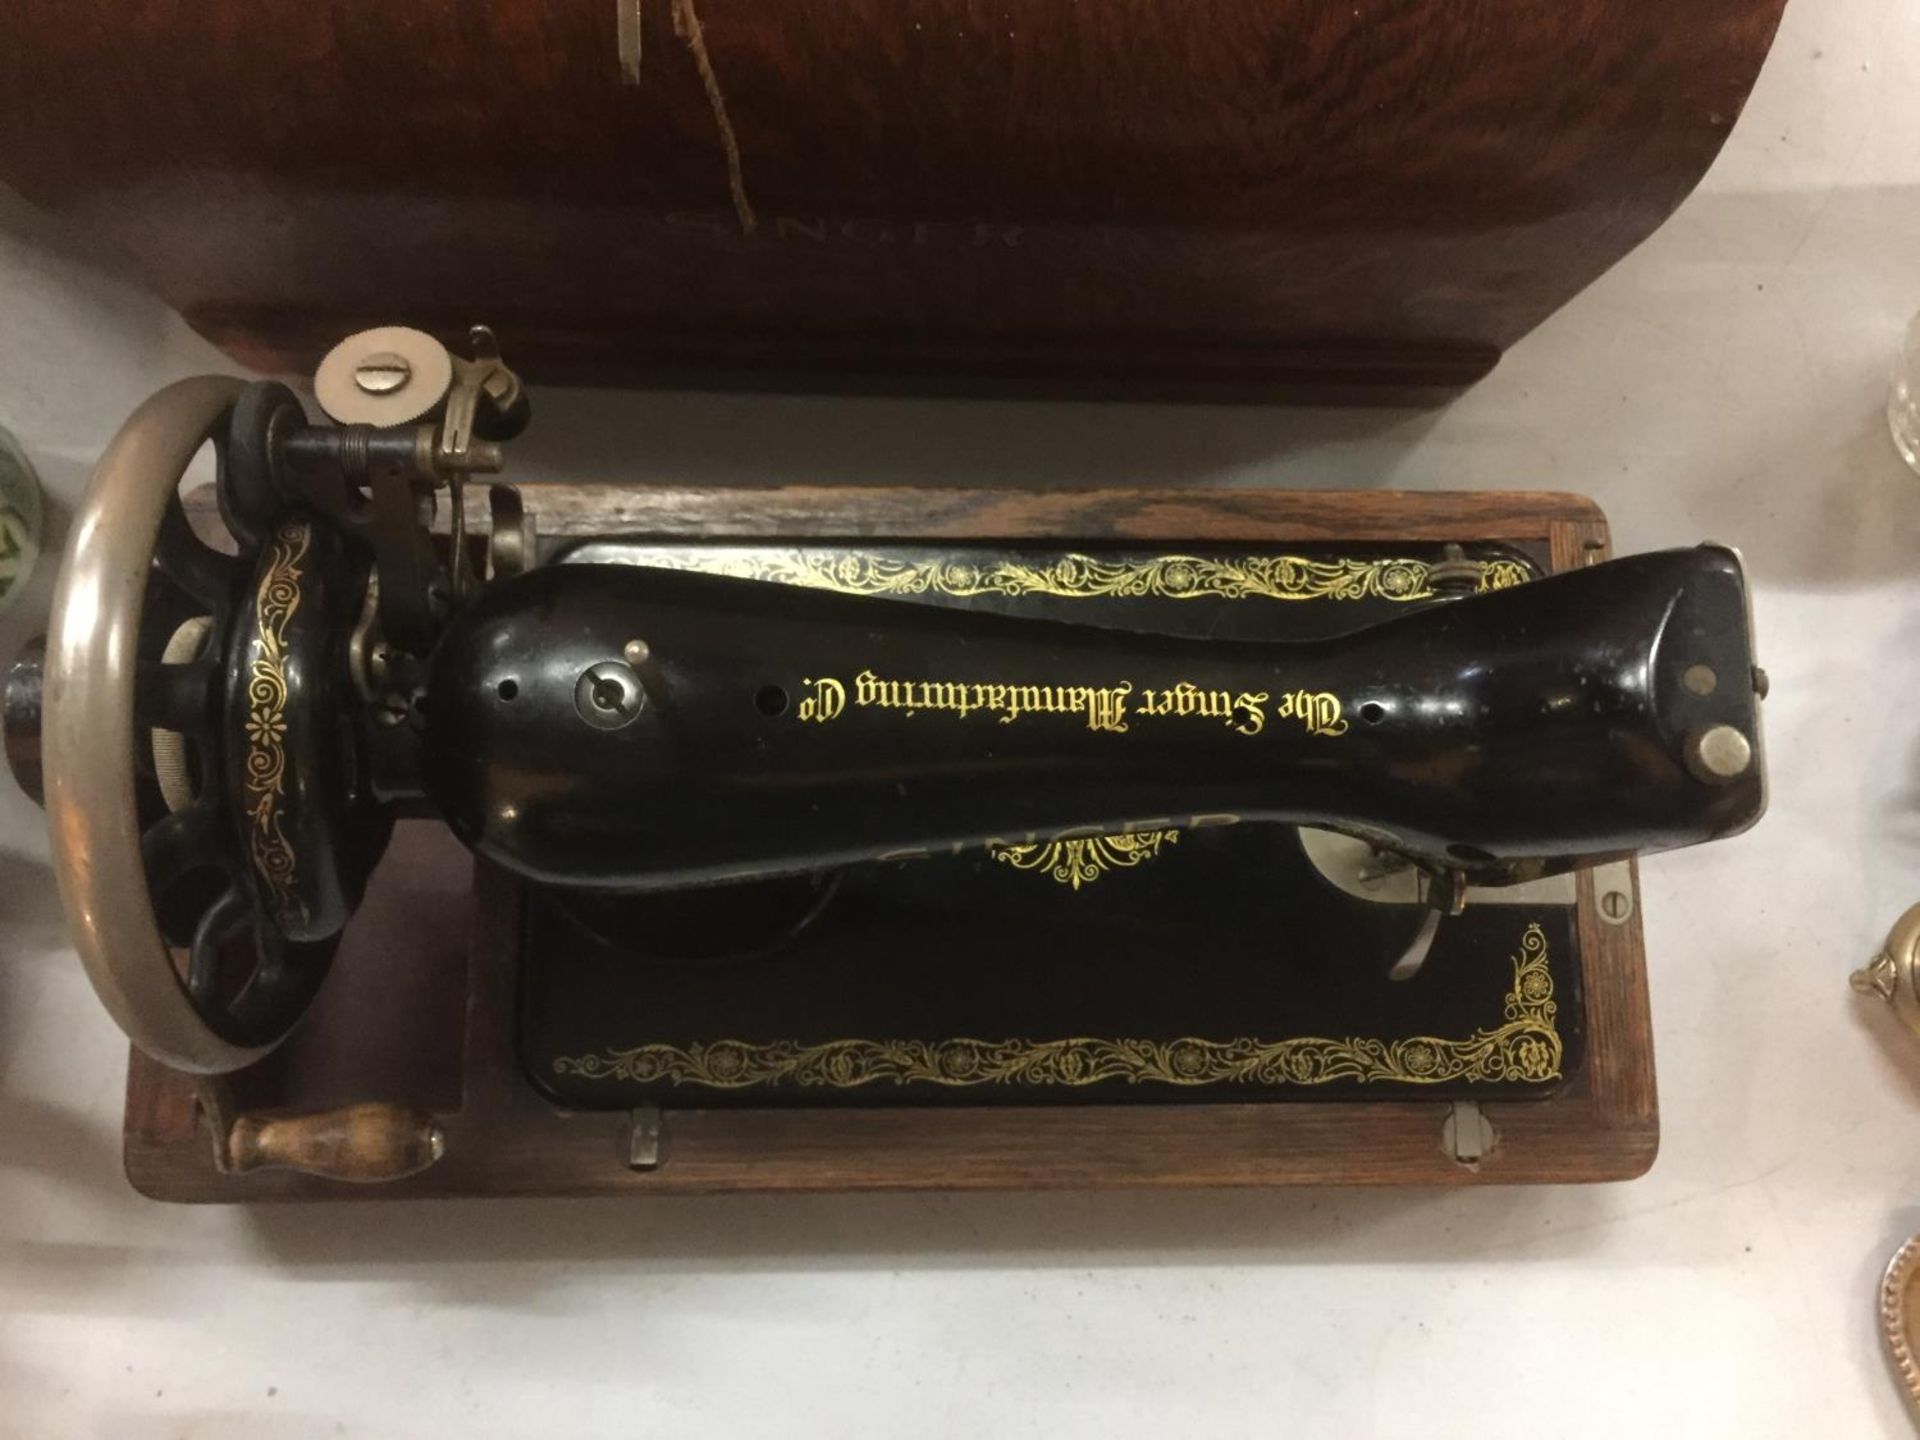 A VINTAGE CASED SINGER SEWING MACHINFE WITH THE KEY, REGISTRATION NUMBER Y7445733 - Image 4 of 6